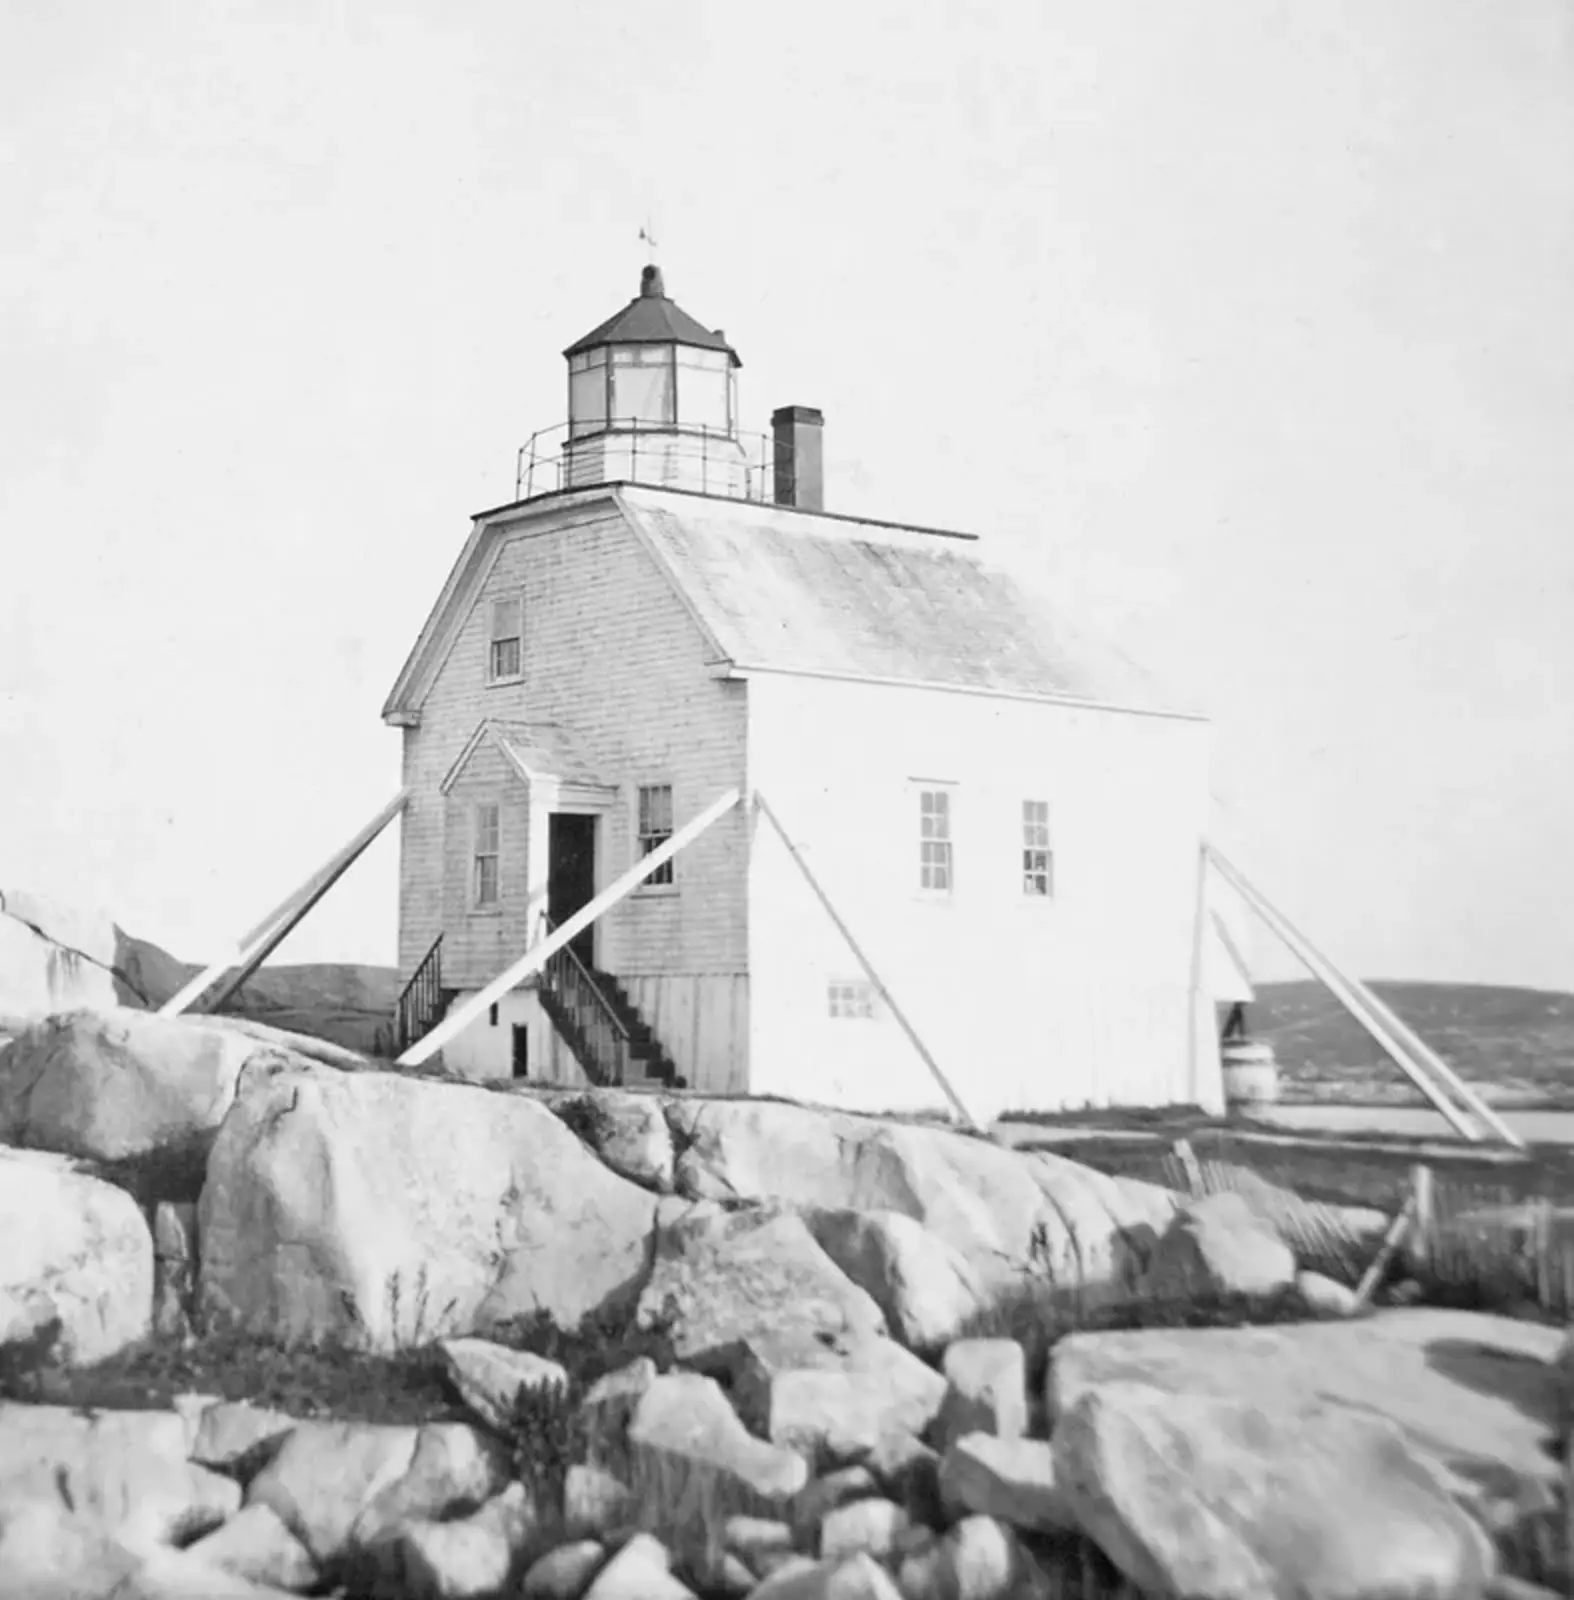 Original Peggy’s Point Lighthouse – note braces for steadying the structure